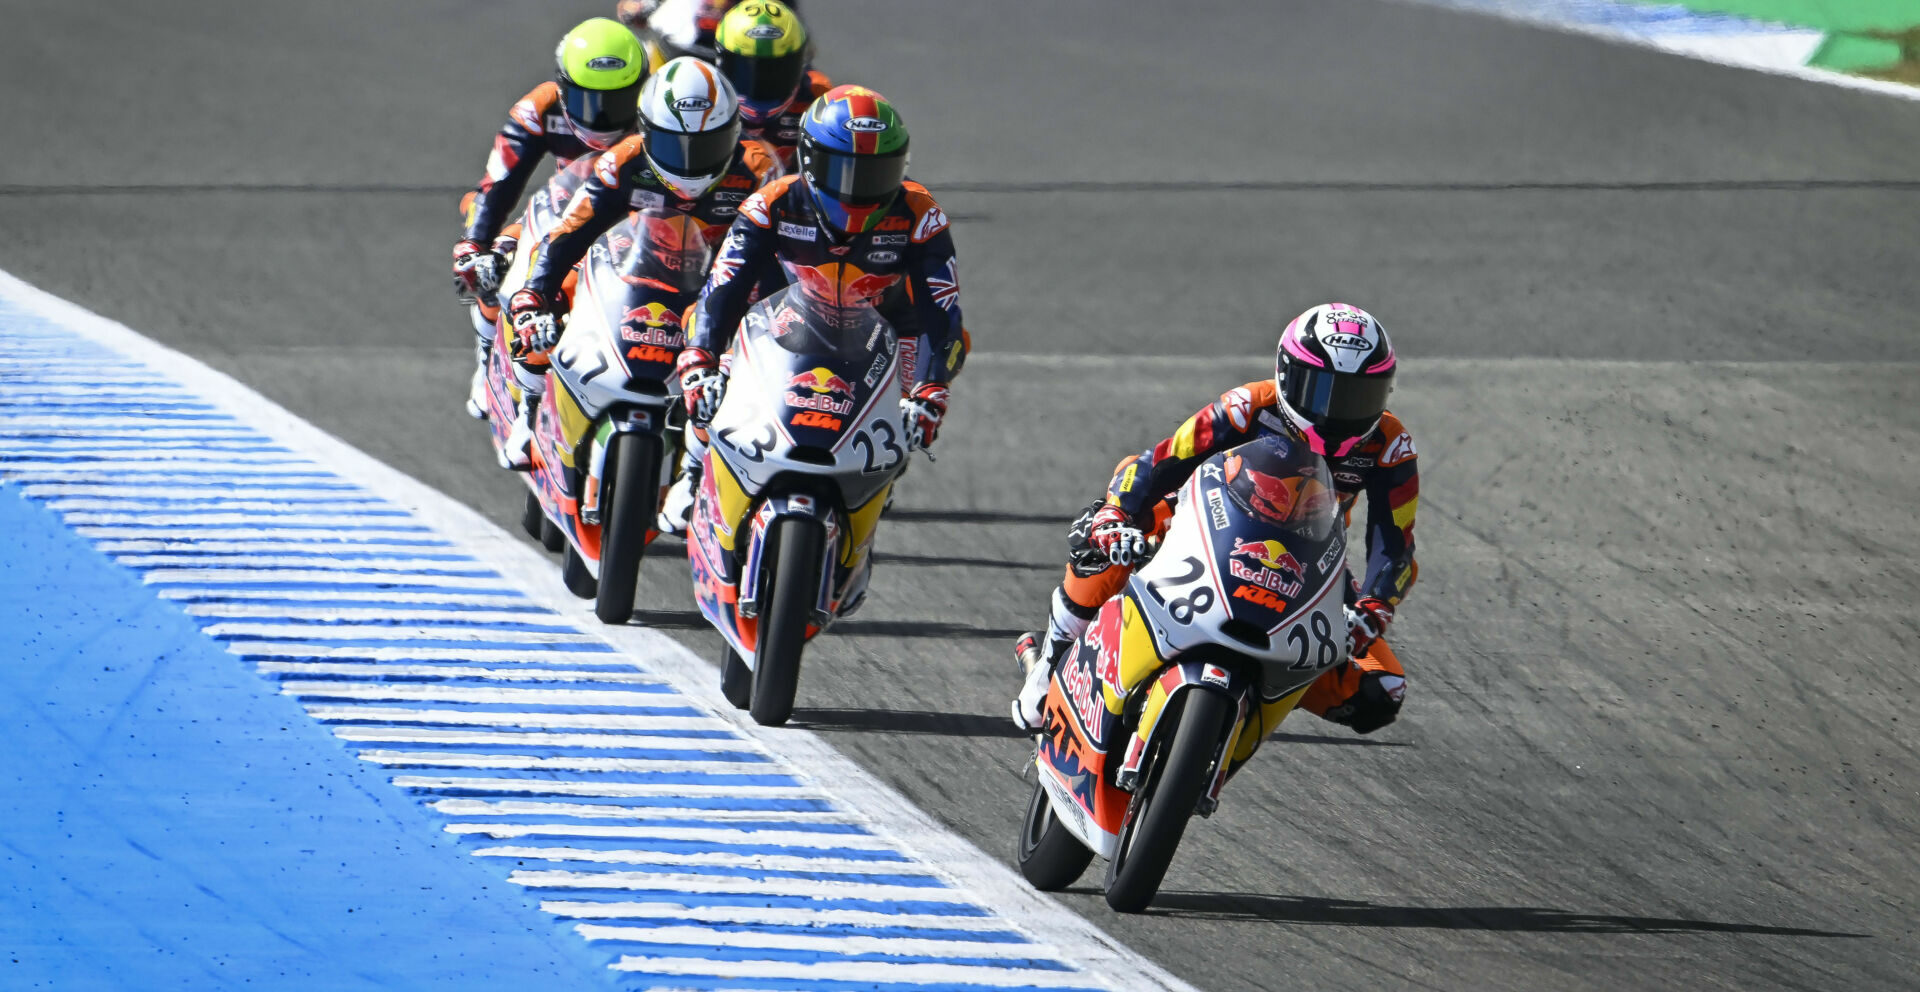 Maximo Quiles (28) leads Rhys Stephenson (23), Daniel Shahril (57), and others Friday at Jerez. Photo courtesy Red Bull.